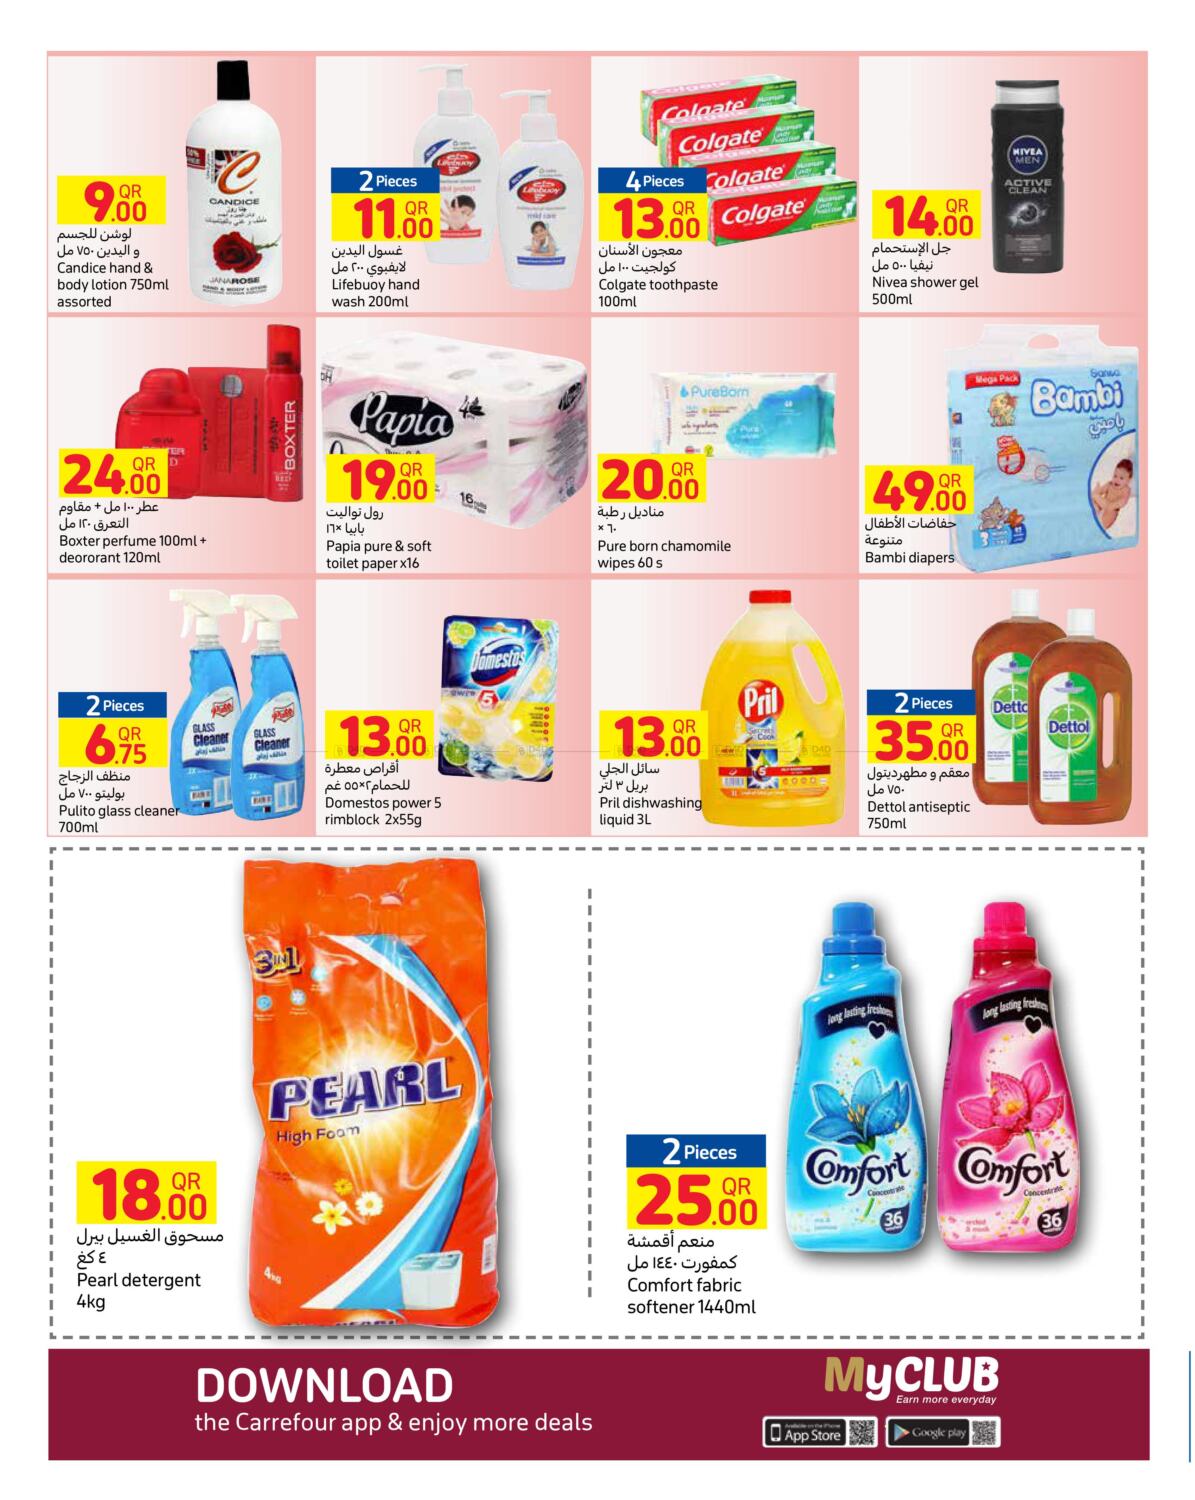 Carrefour Weekly Offers in Qatar Offers - Qatar. Till 13th July